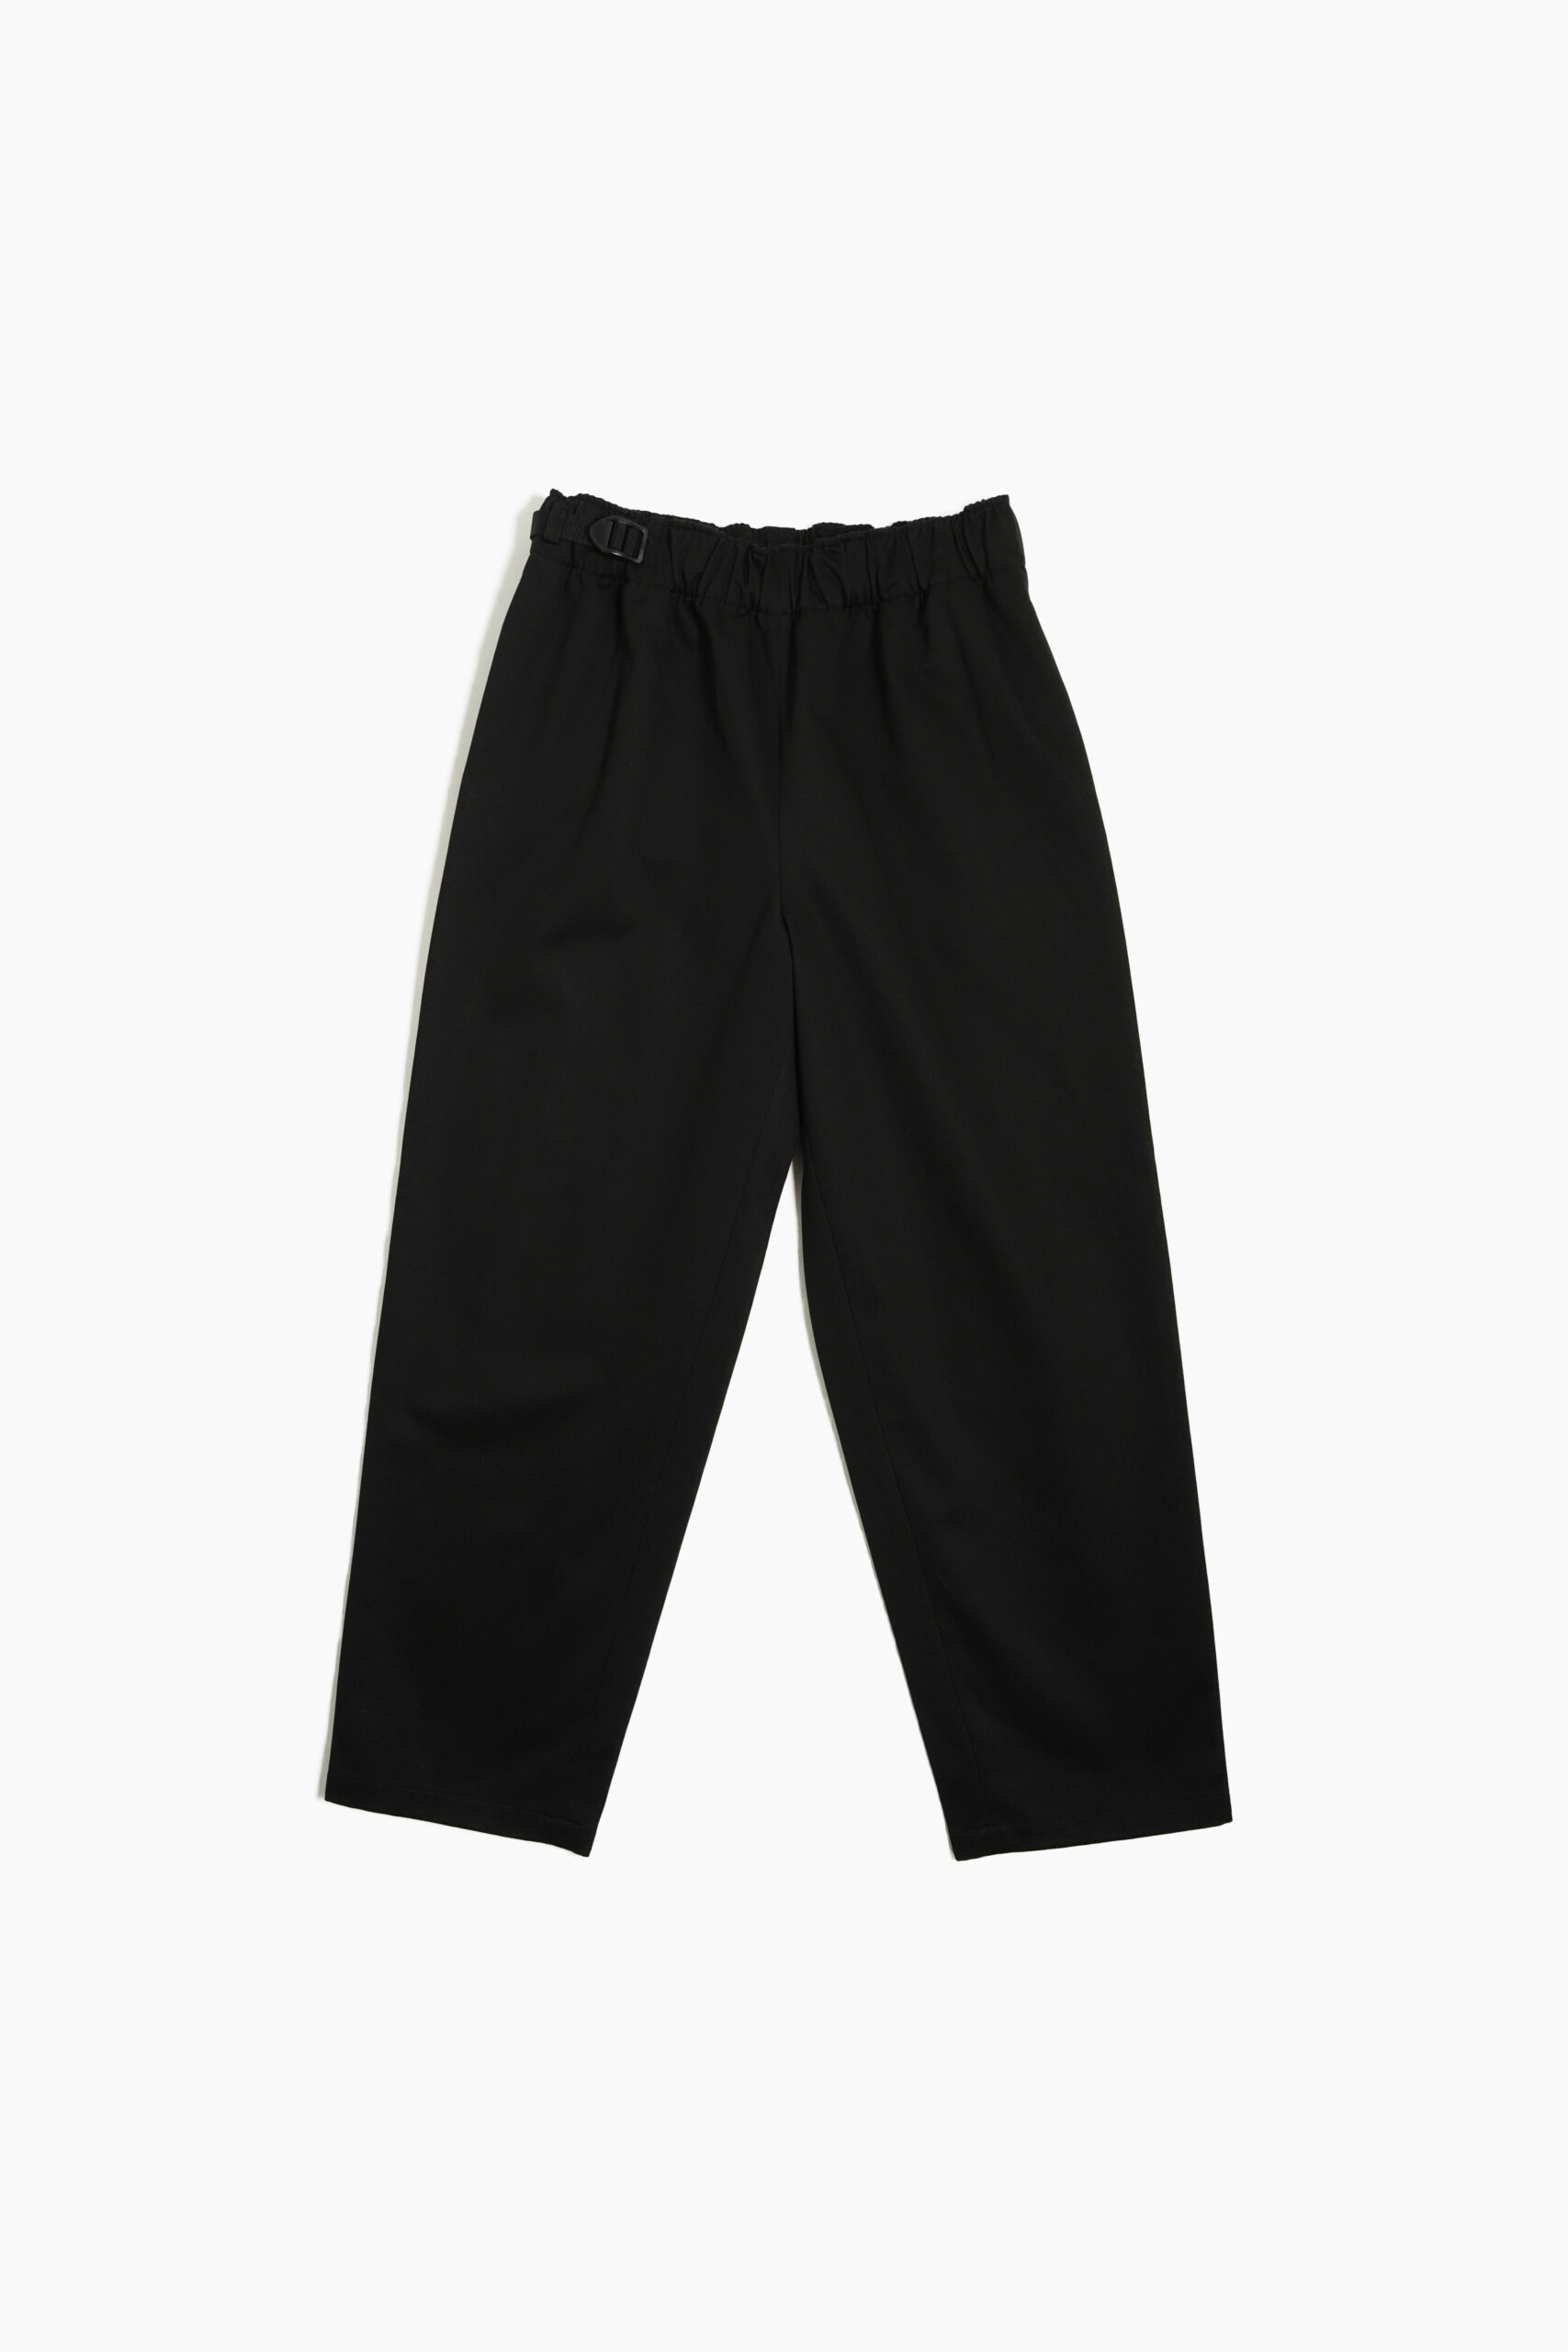 BELTED TROUSERS TYPE 2 - COTTON